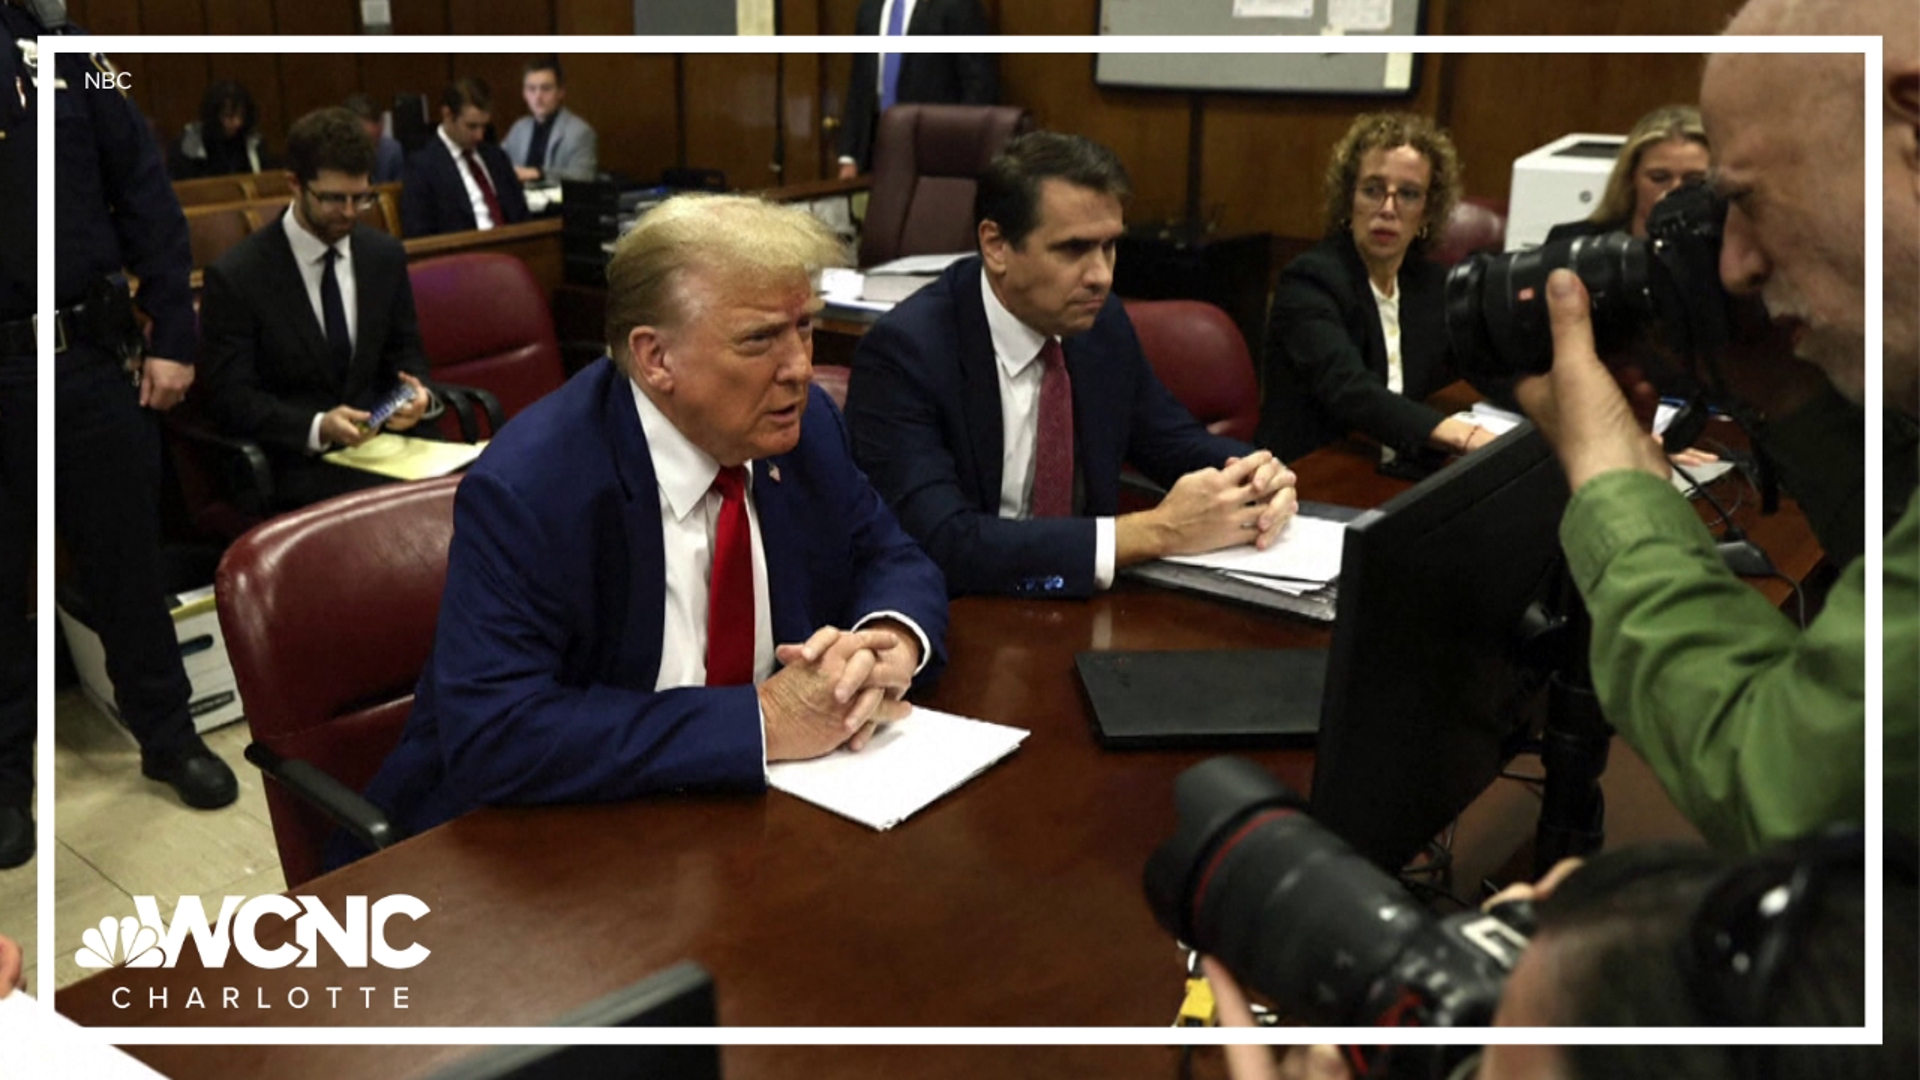 Daniels strode briskly into the courtroom before being sworn in, not pausing to look at Trump, who stared straight ahead as she entered the room.